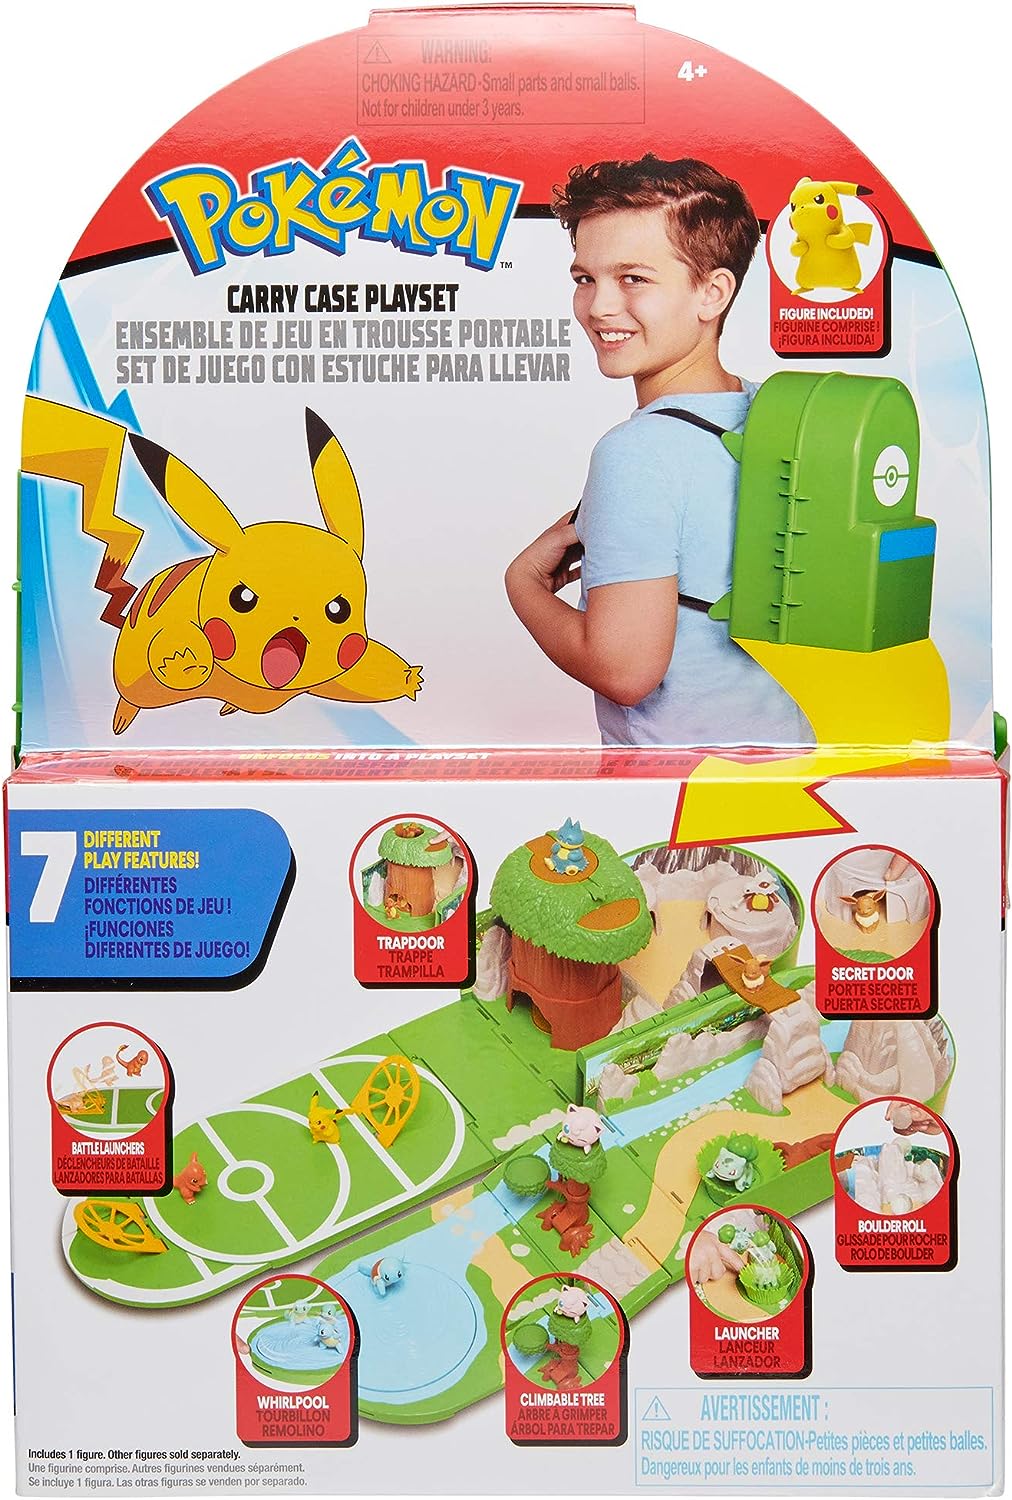 Pokémon Carry Case Playset, Feat. Different Locations Within One Playset, with 2-Inch Pikachu Figure, Treetop Trap Door, Battle Area, Hidden Cave and More - Easily Folds into a Backpack